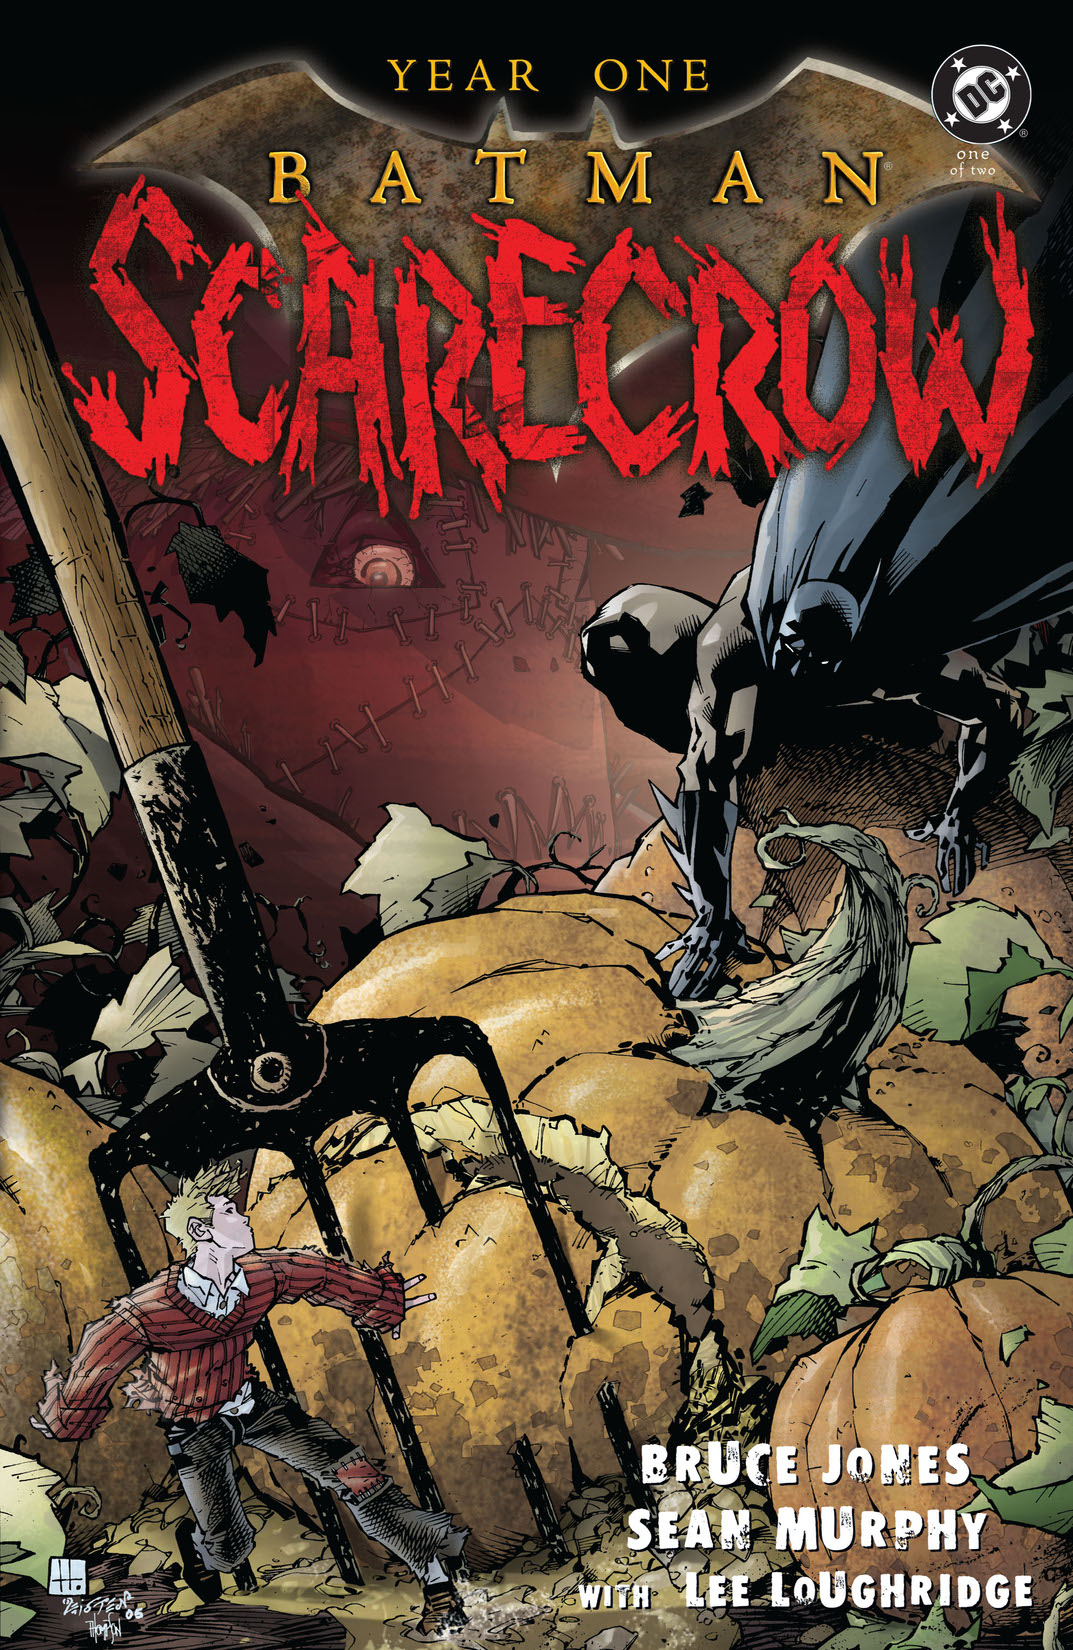 Year One: Batman/Scarecrow #1 preview images